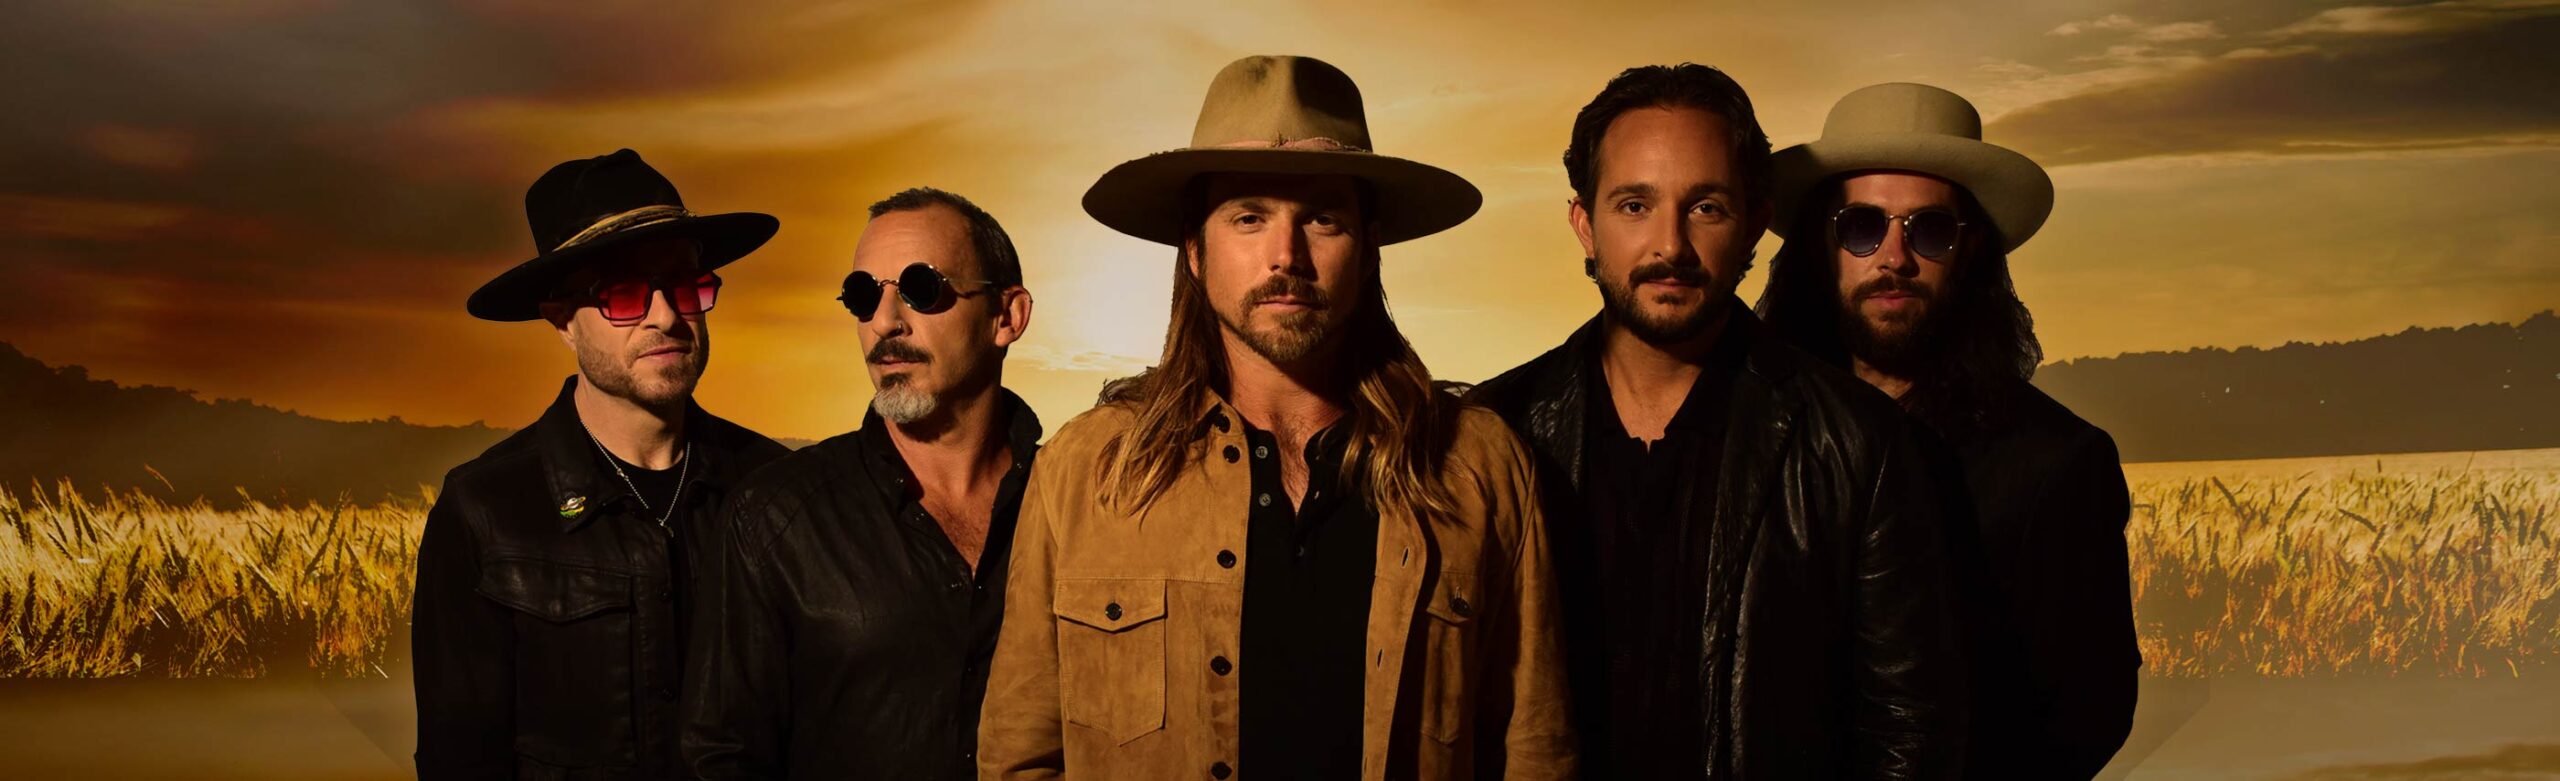 Lukas Nelson & Promise of the Real Announce Concerts at The ELM and The Wilma Image